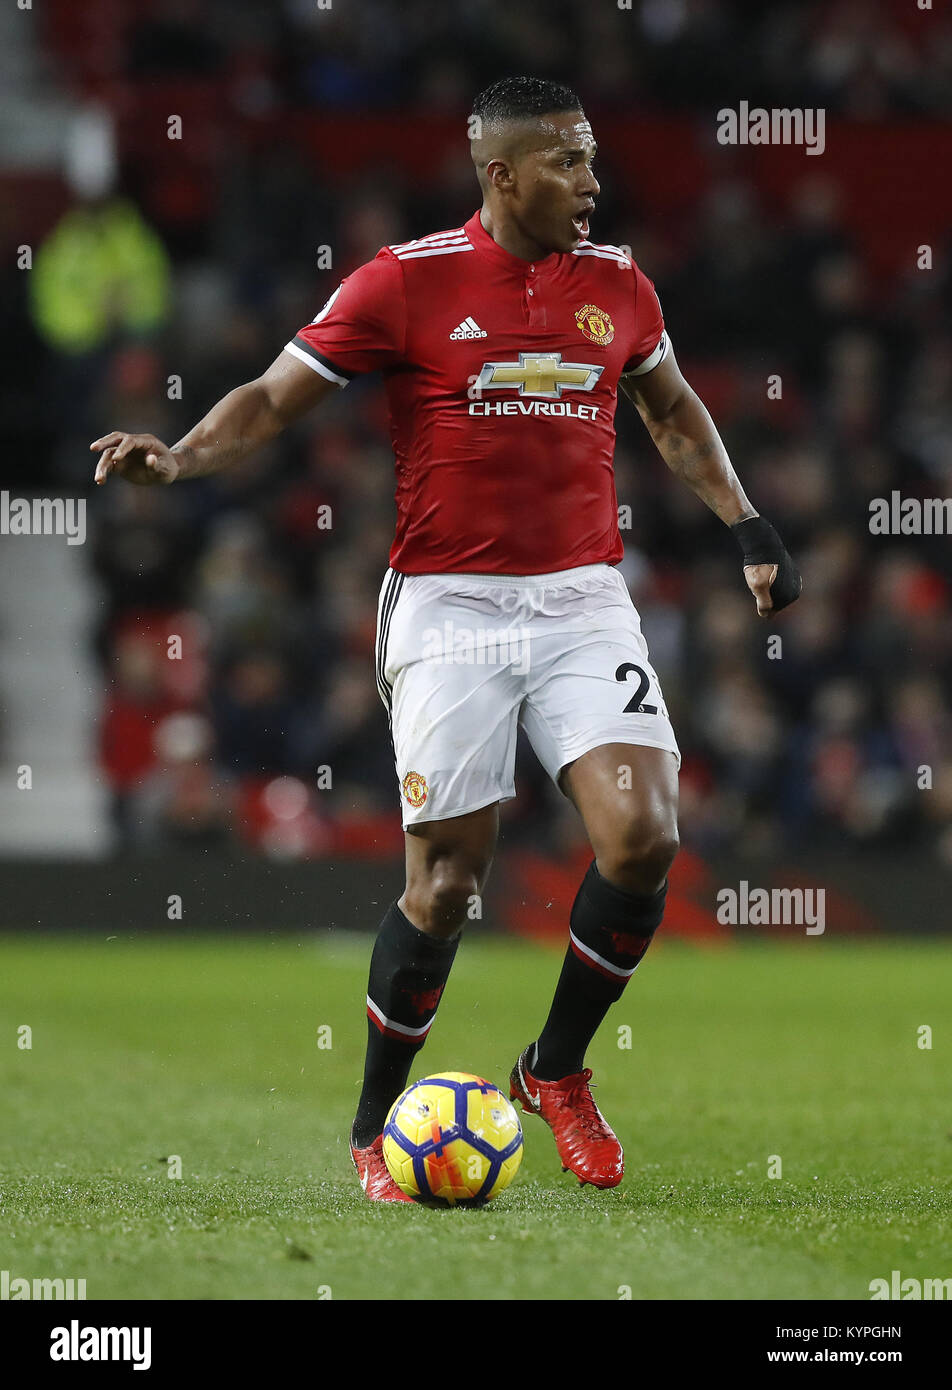 Manchester United's Antonio Valencia during the Premier League match at Old Trafford, Manchester. PRESS ASSOCIATION Photo. Picture date: Monday January 15, 2018. See PA story SOCCER Man Utd. Photo credit should read: Martin Rickett/PA Wire. RESTRICTIONS: EDITORIAL USE ONLY No use with unauthorised audio, video, data, fixture lists, club/league logos or 'live' services. Online in-match use limited to 75 images, no video emulation. No use in betting, games or single club/league/player publications. Stock Photo